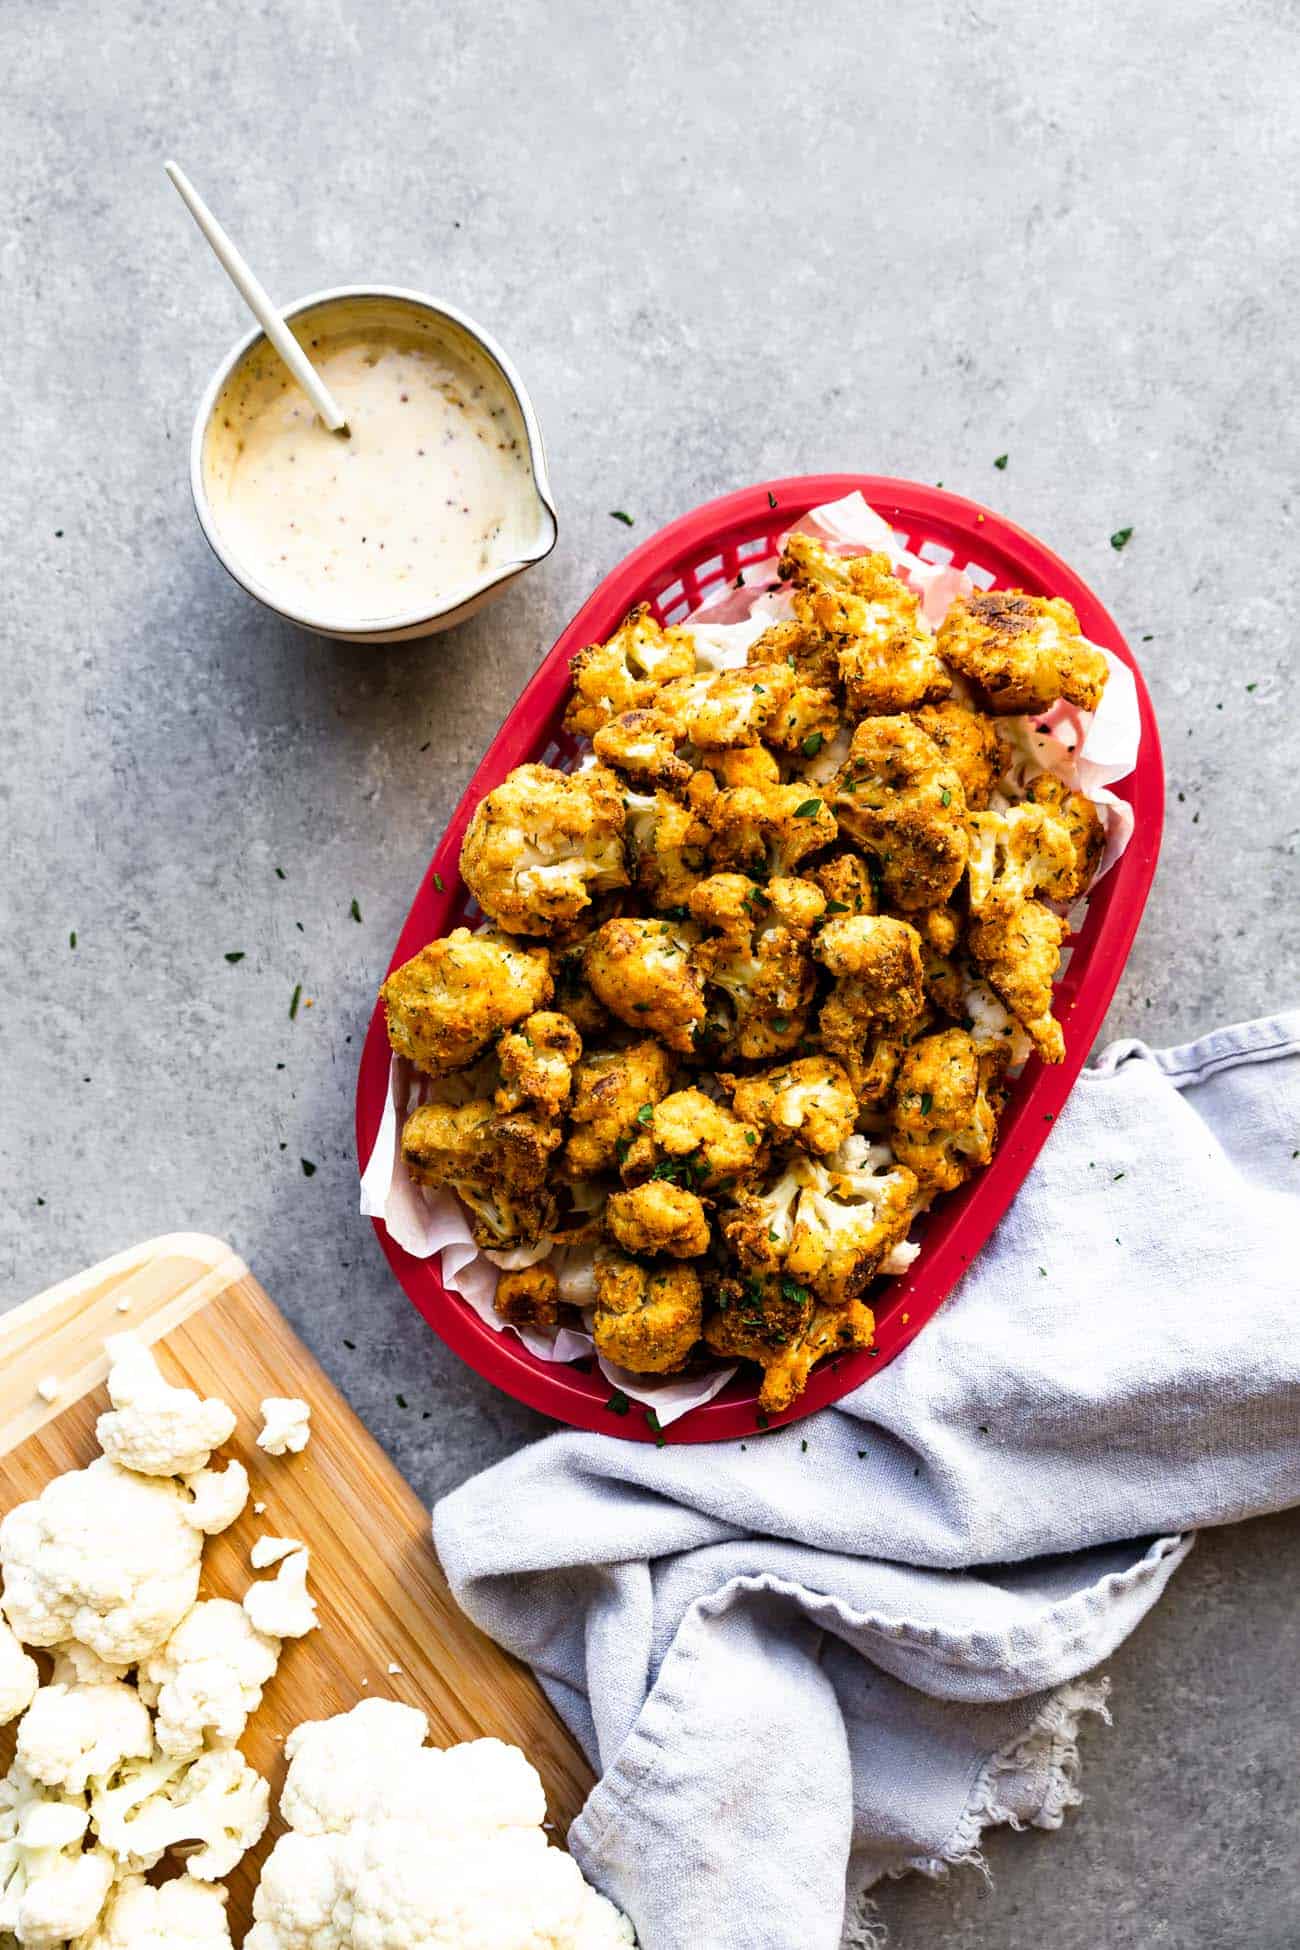 cauliflower nuggets in a red tray with cauliflower florets and sauce on the side